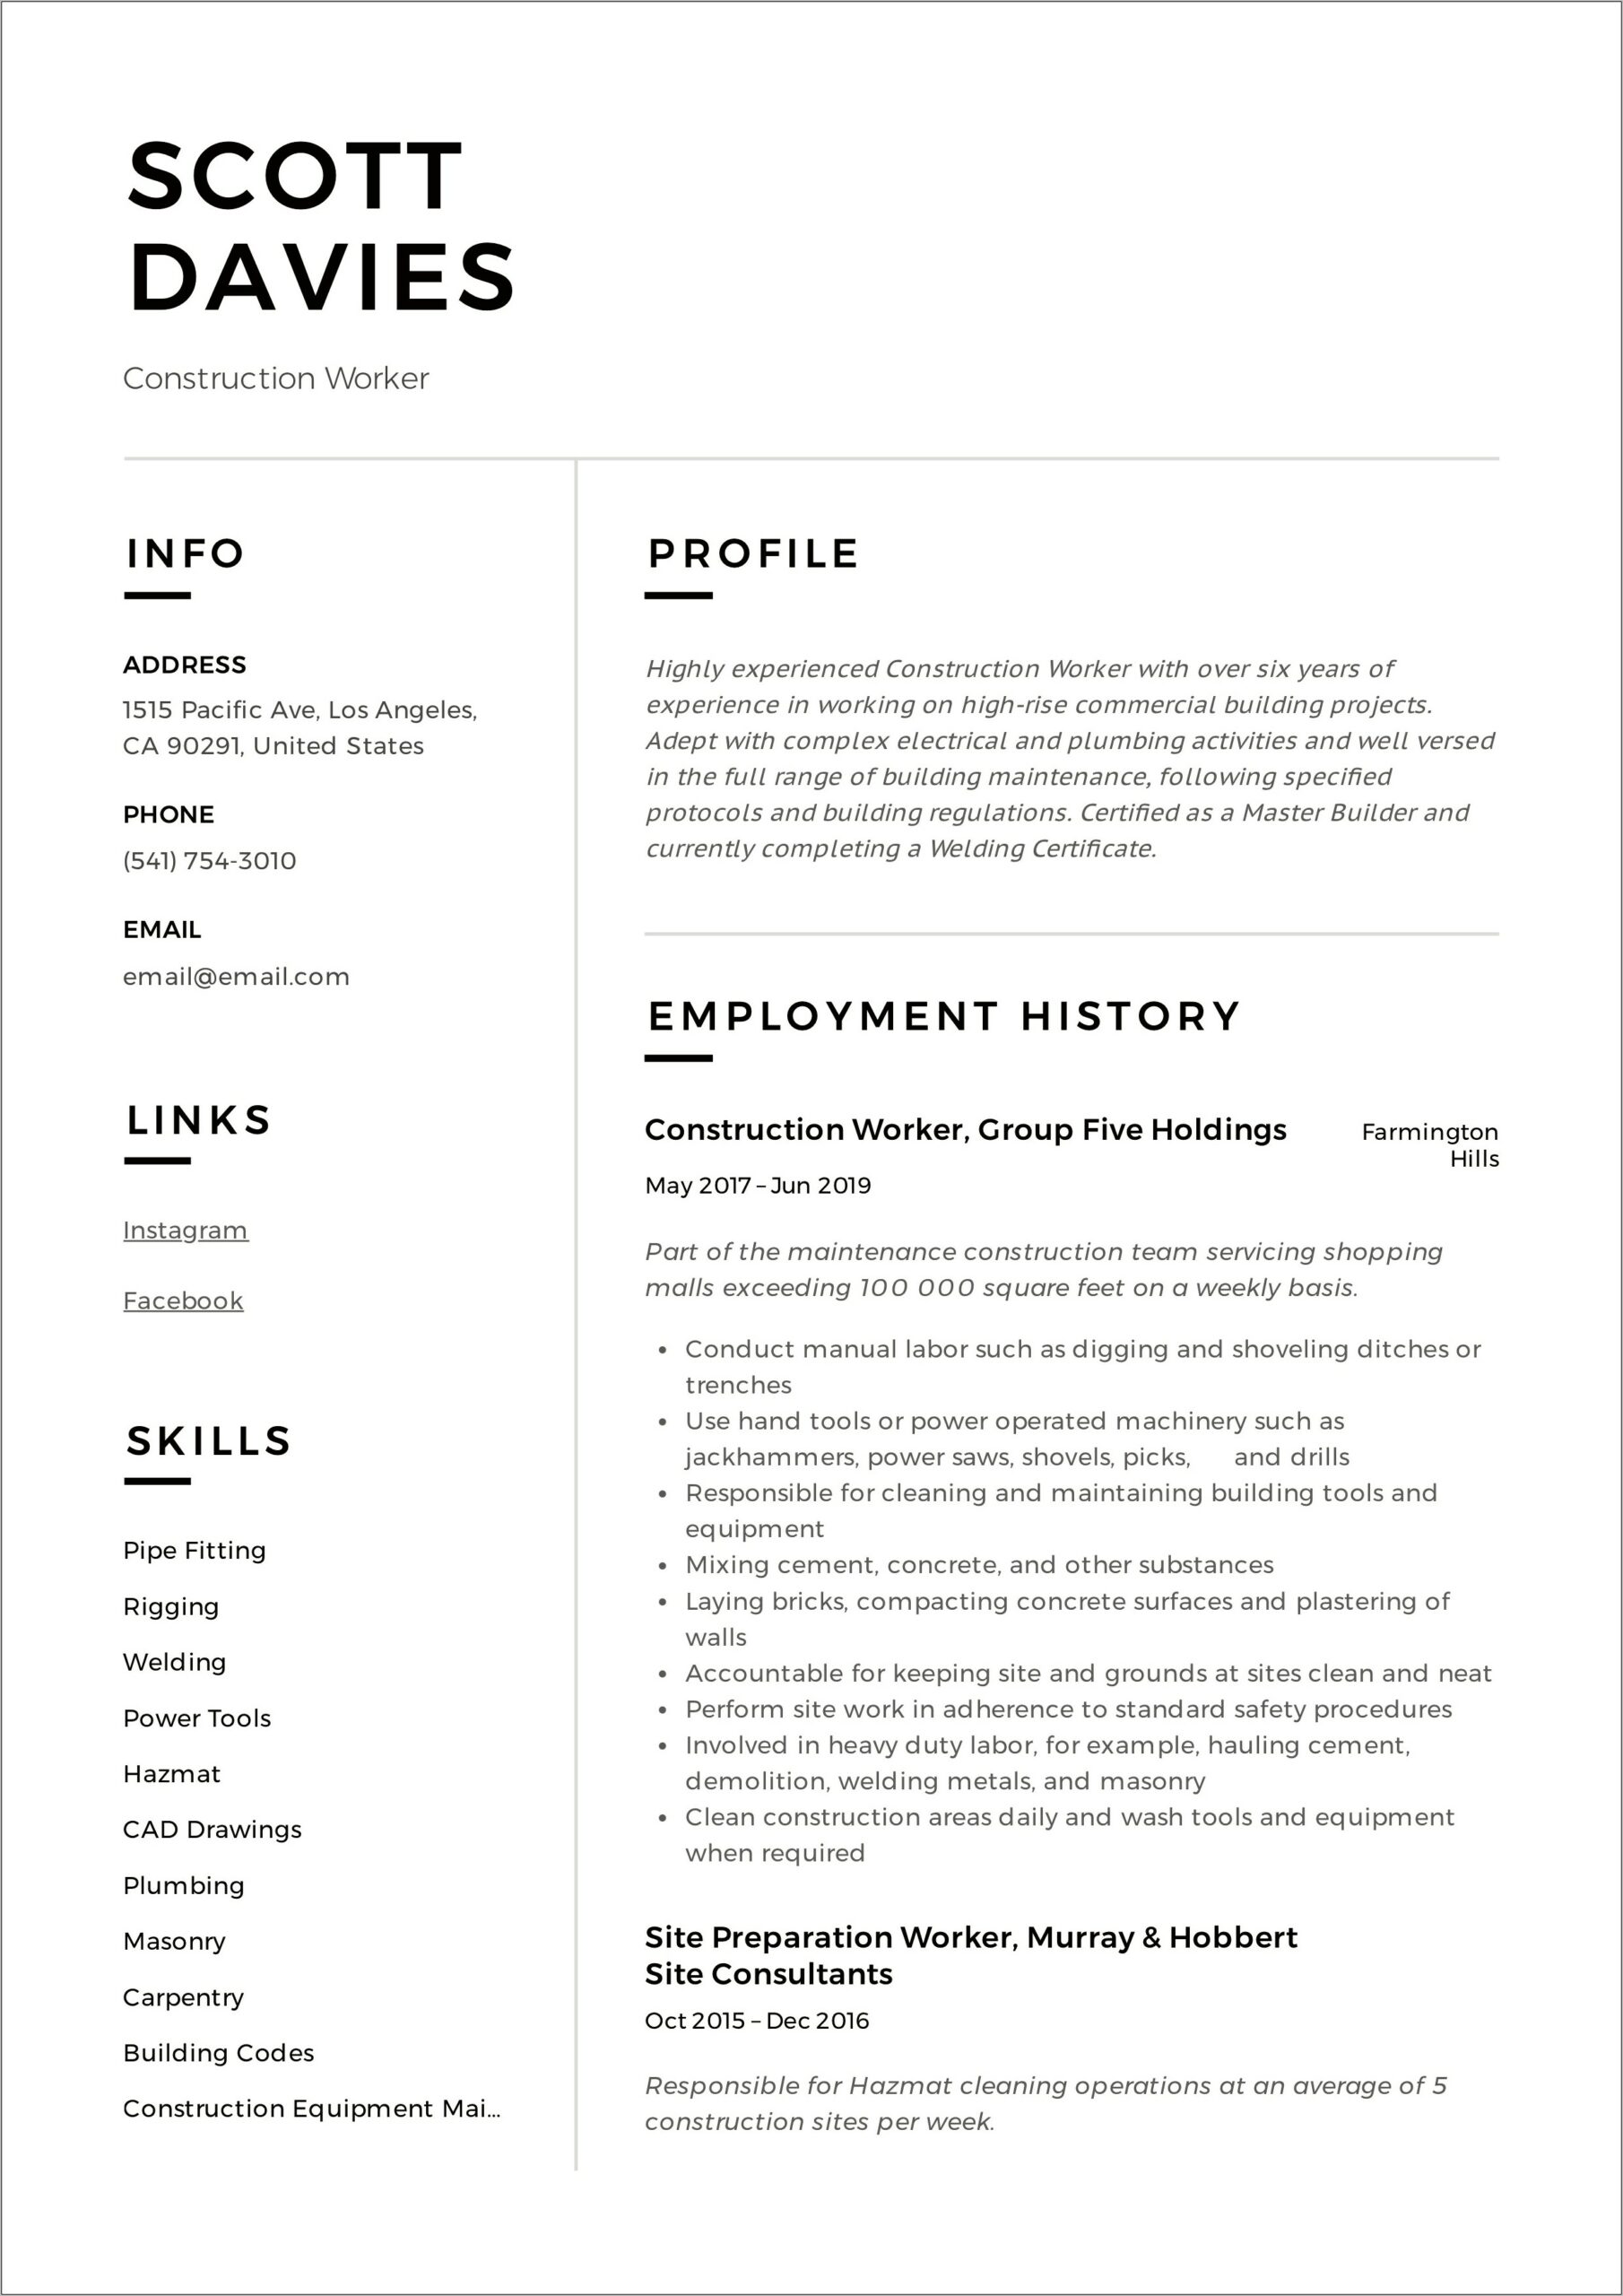 Construction Skills And Abilities For Resume